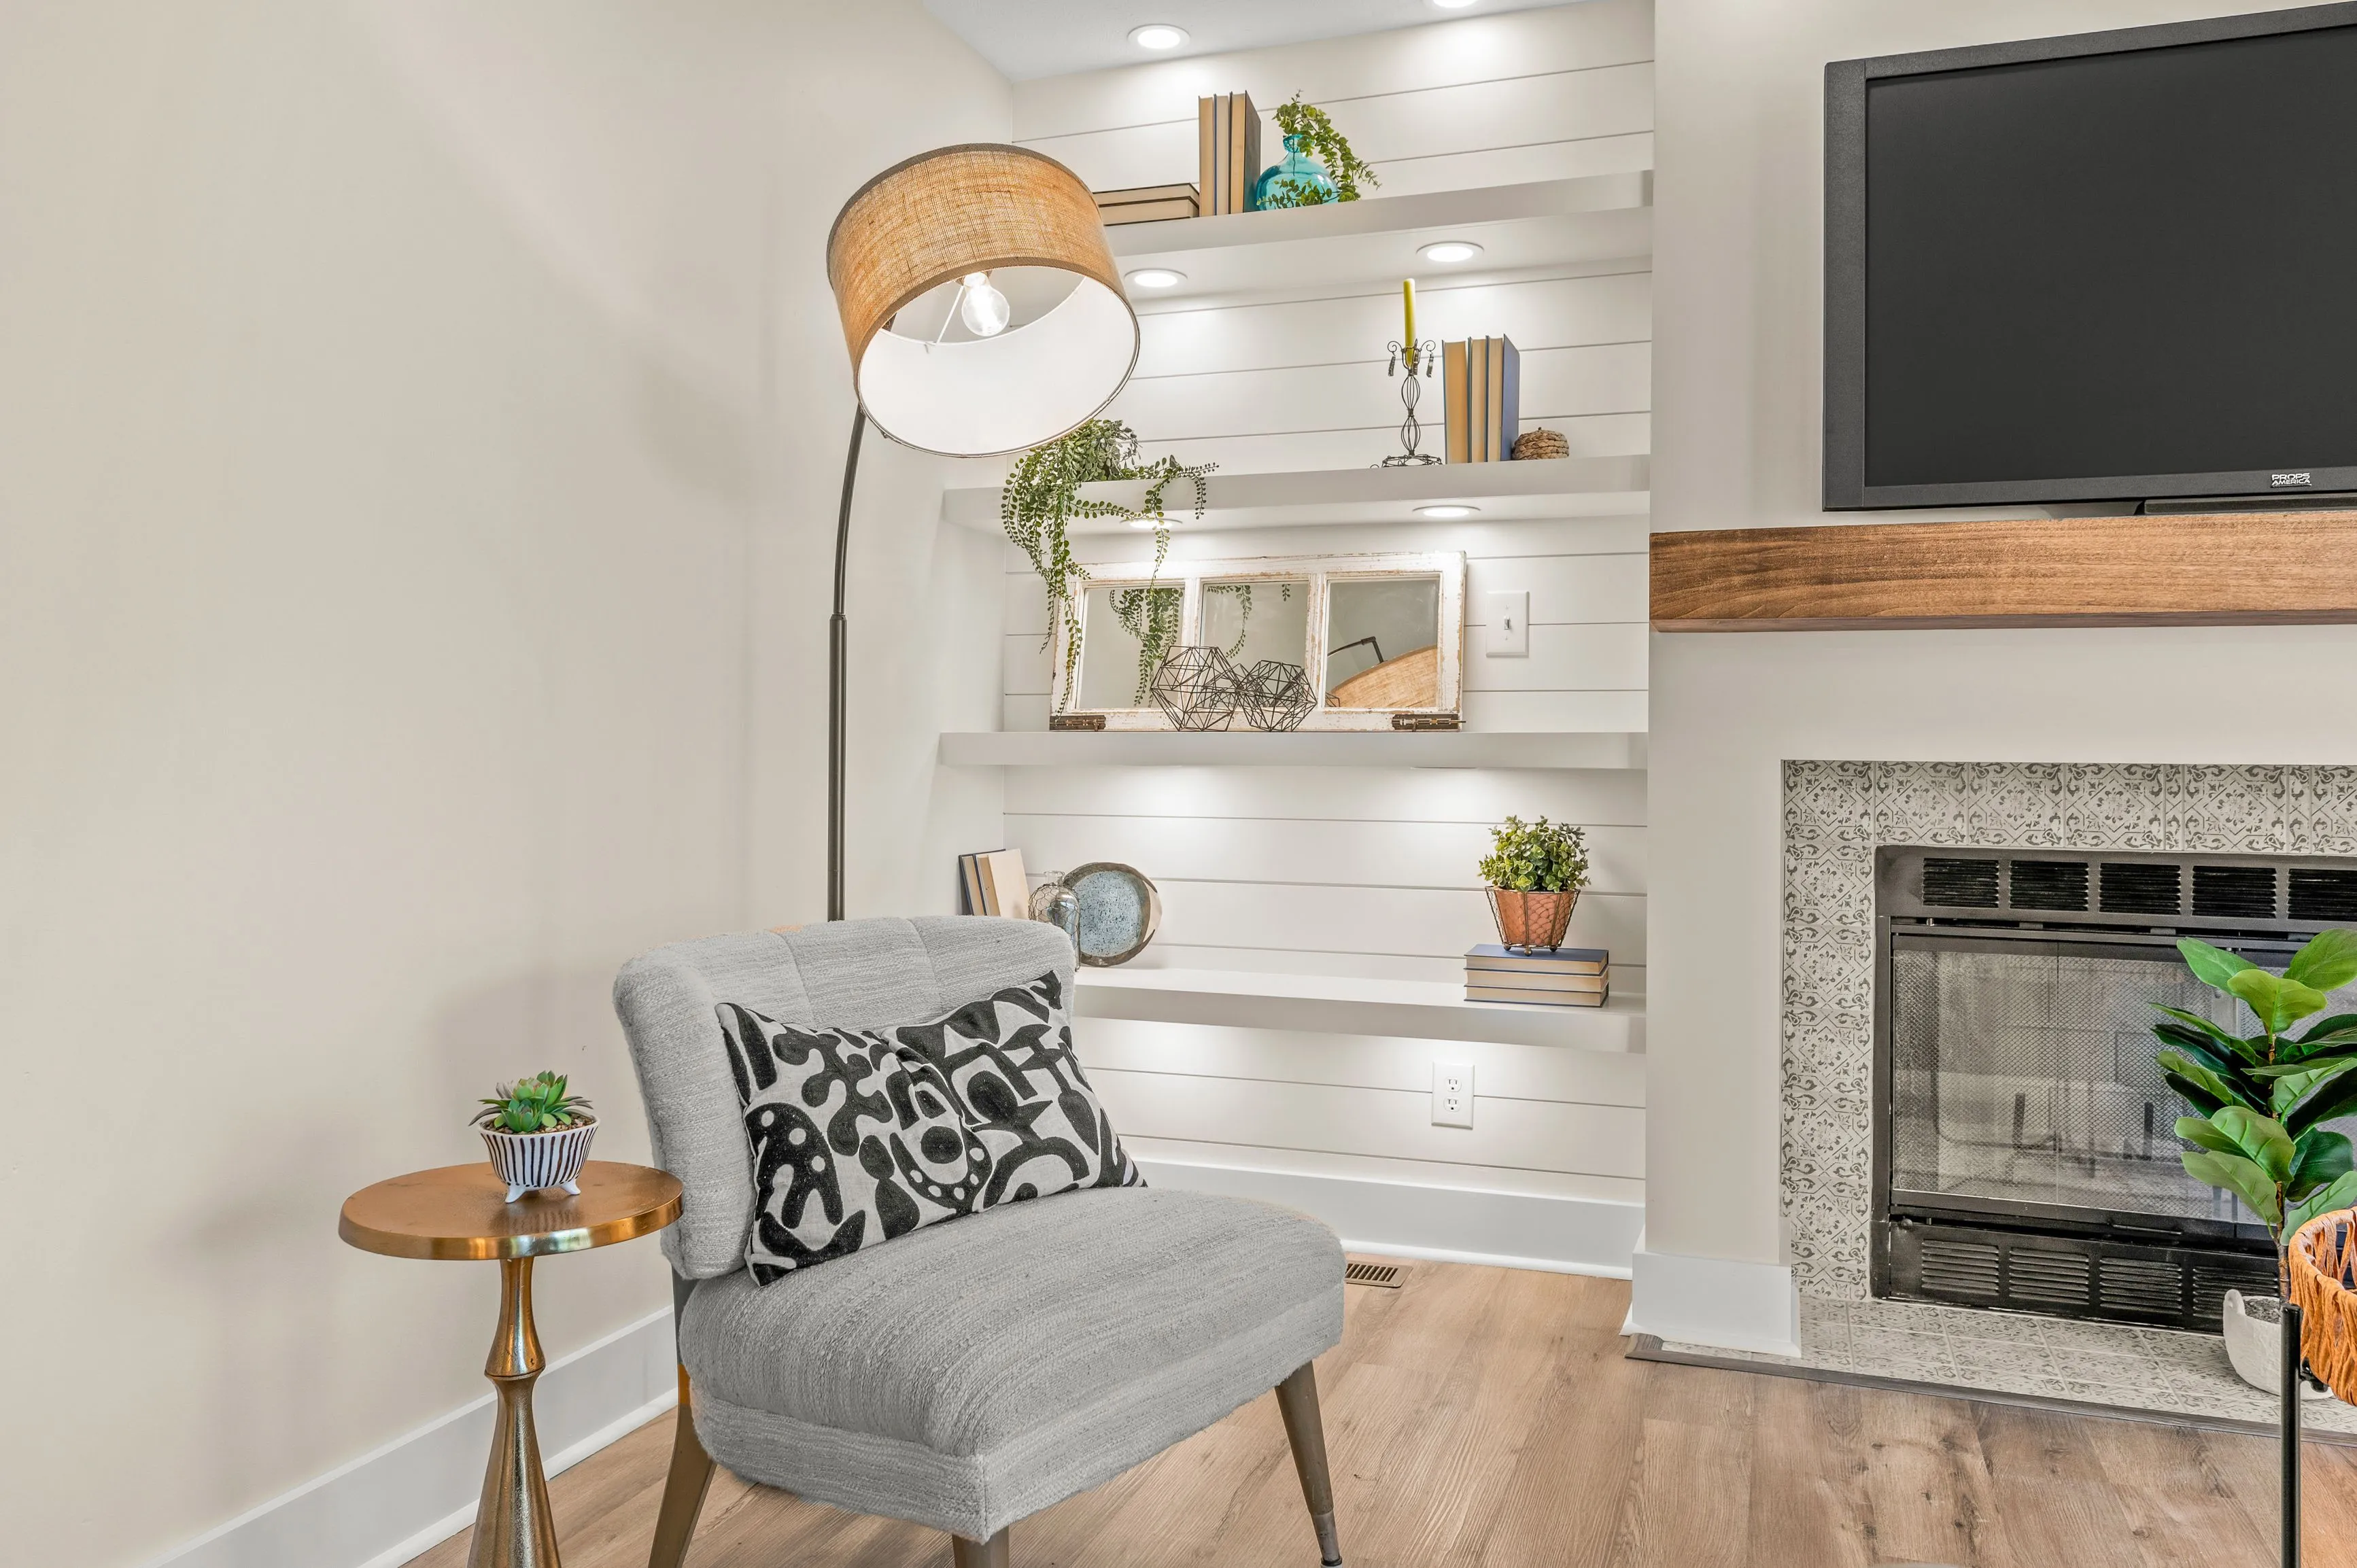 Cozy living room corner with a gray armchair, patterned cushion, floor lamp, side table, floating shelves, television, and a fireplace with green plants.